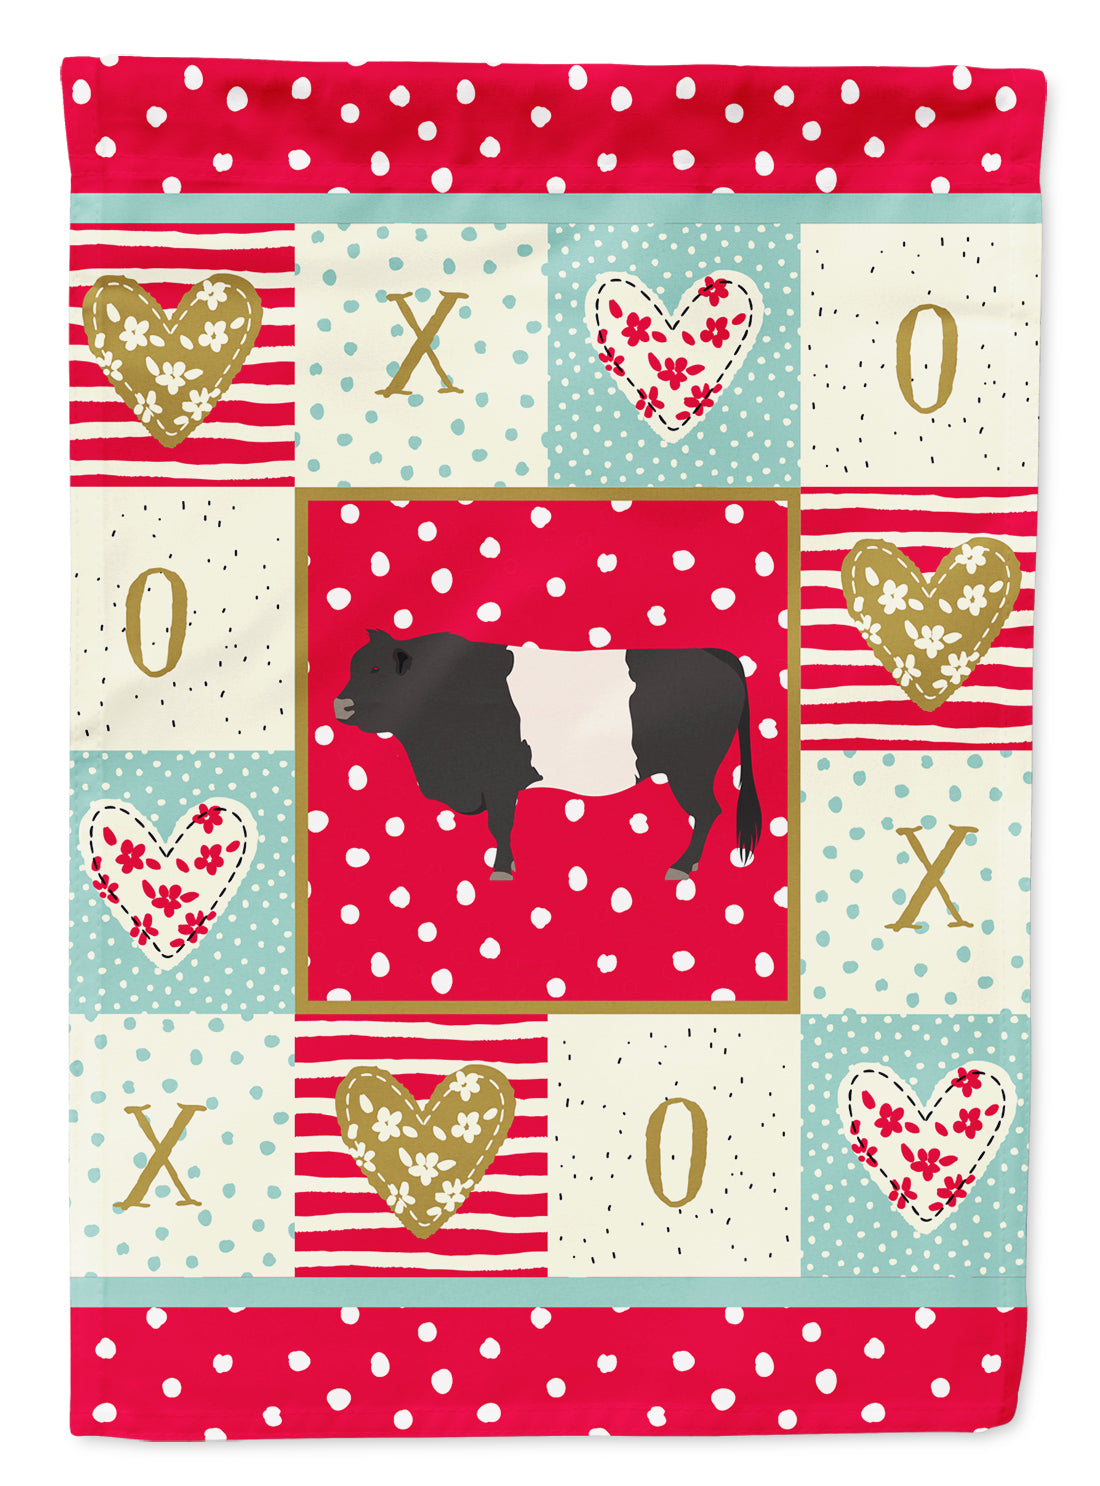 Belted Galloway Cow Love Flag Canvas House Size CK5258CHF